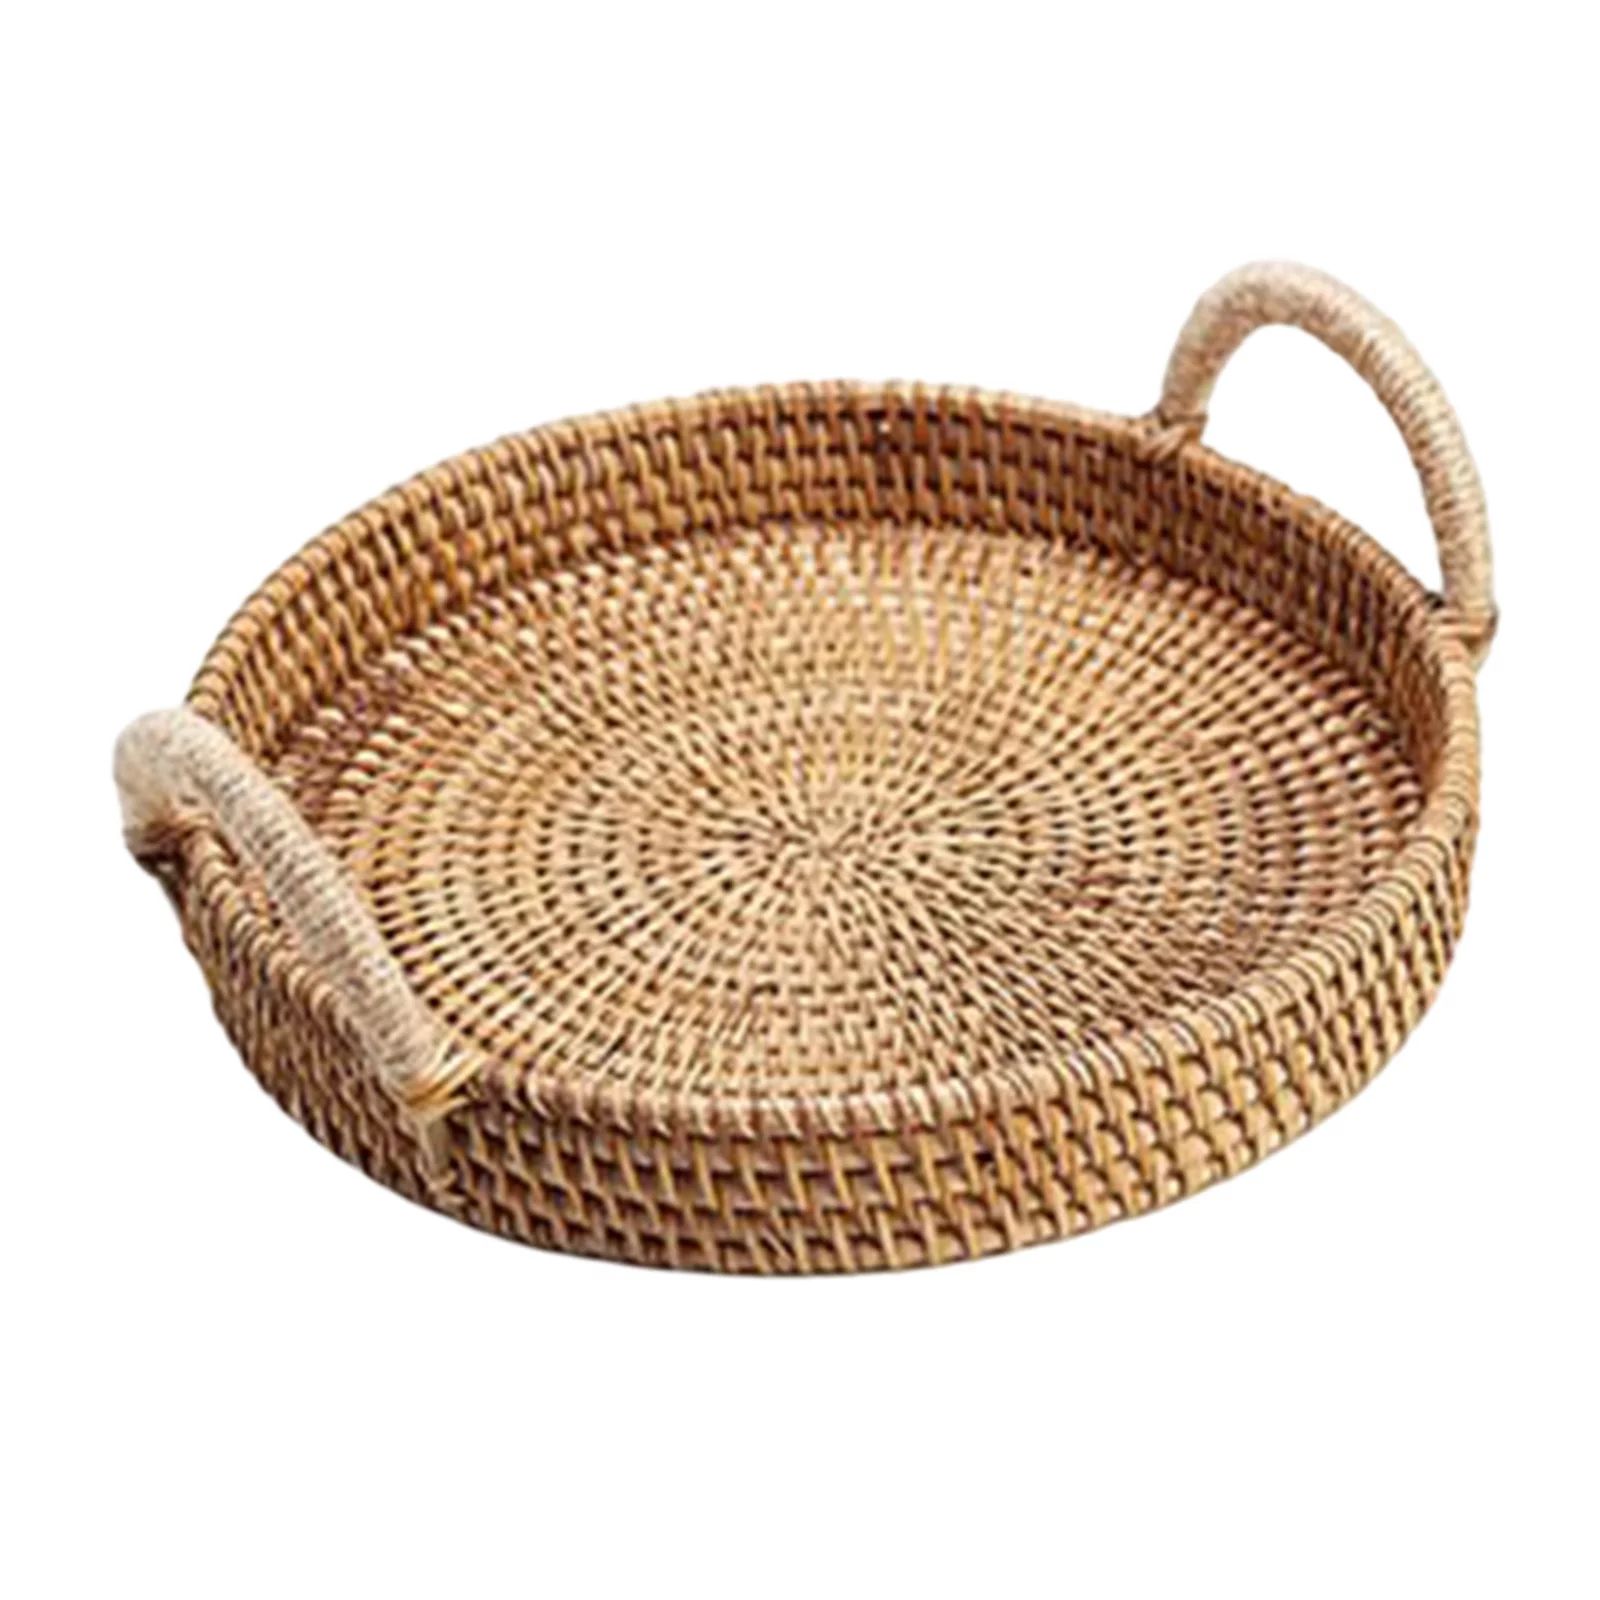 Handcrafted Wicker Serving Basket with Wooden Handles Fruit for Round Handle L | Walmart (US)